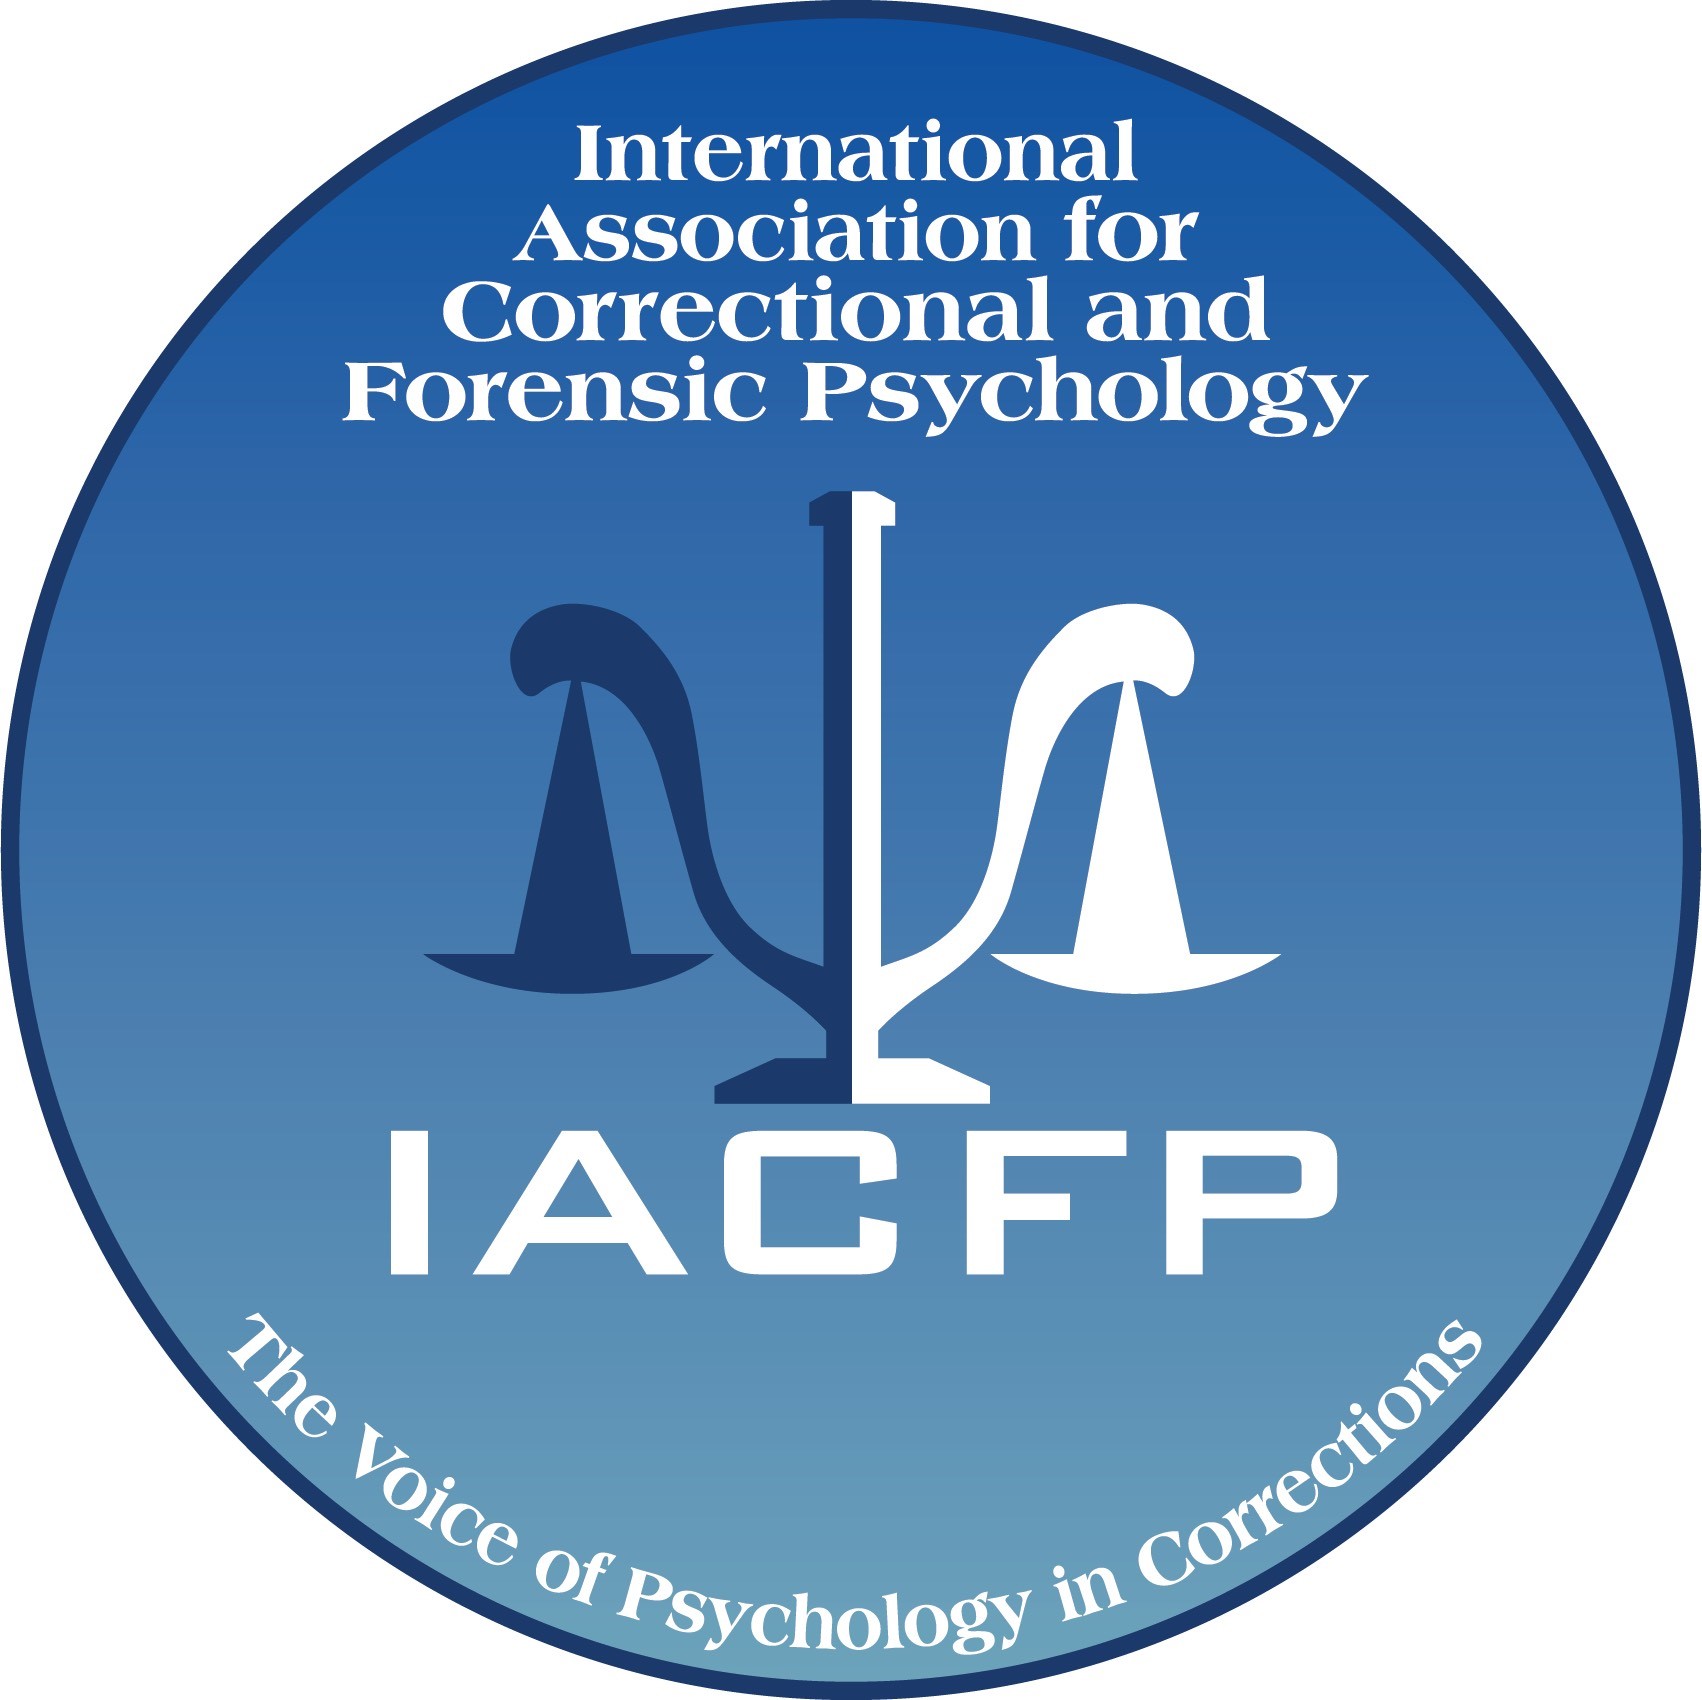 IACFP - International Association for Correctional and Forensic Psychology